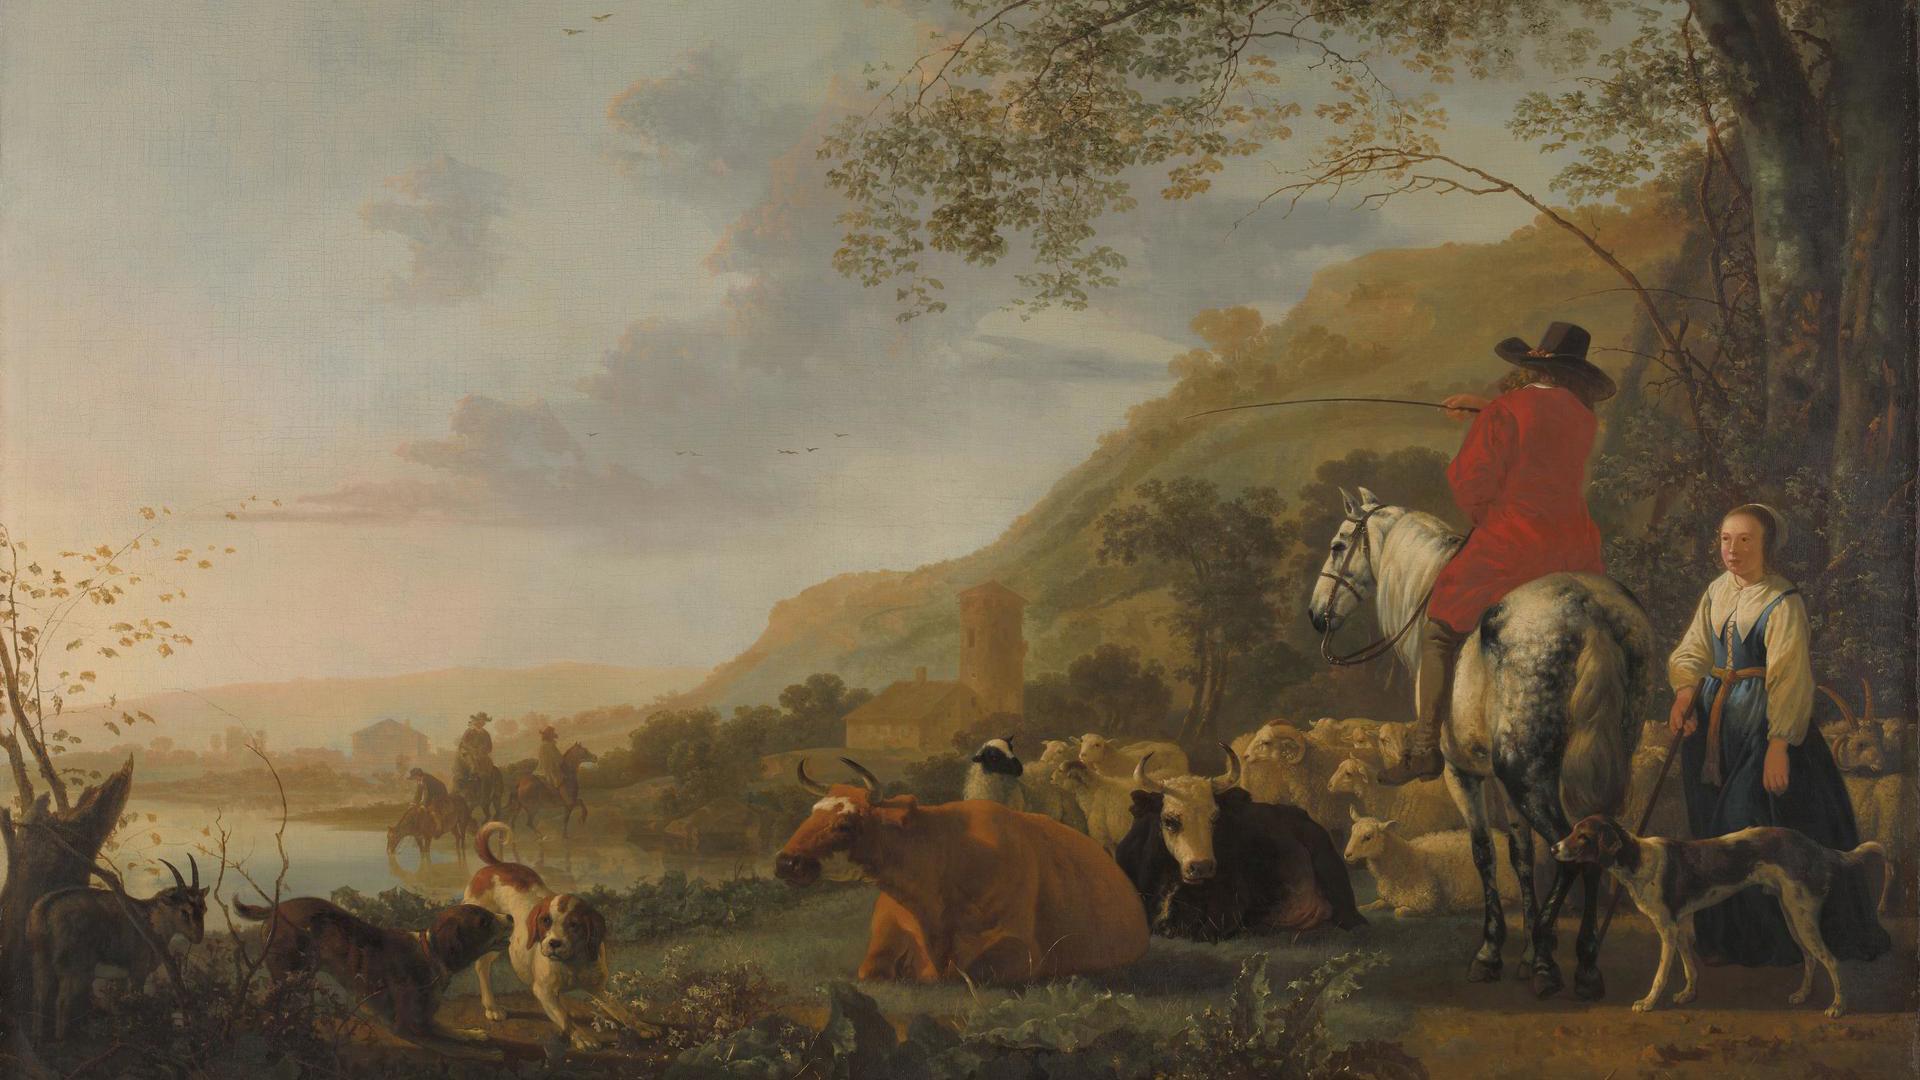 A Hilly Landscape with Figures by Aelbert Cuyp